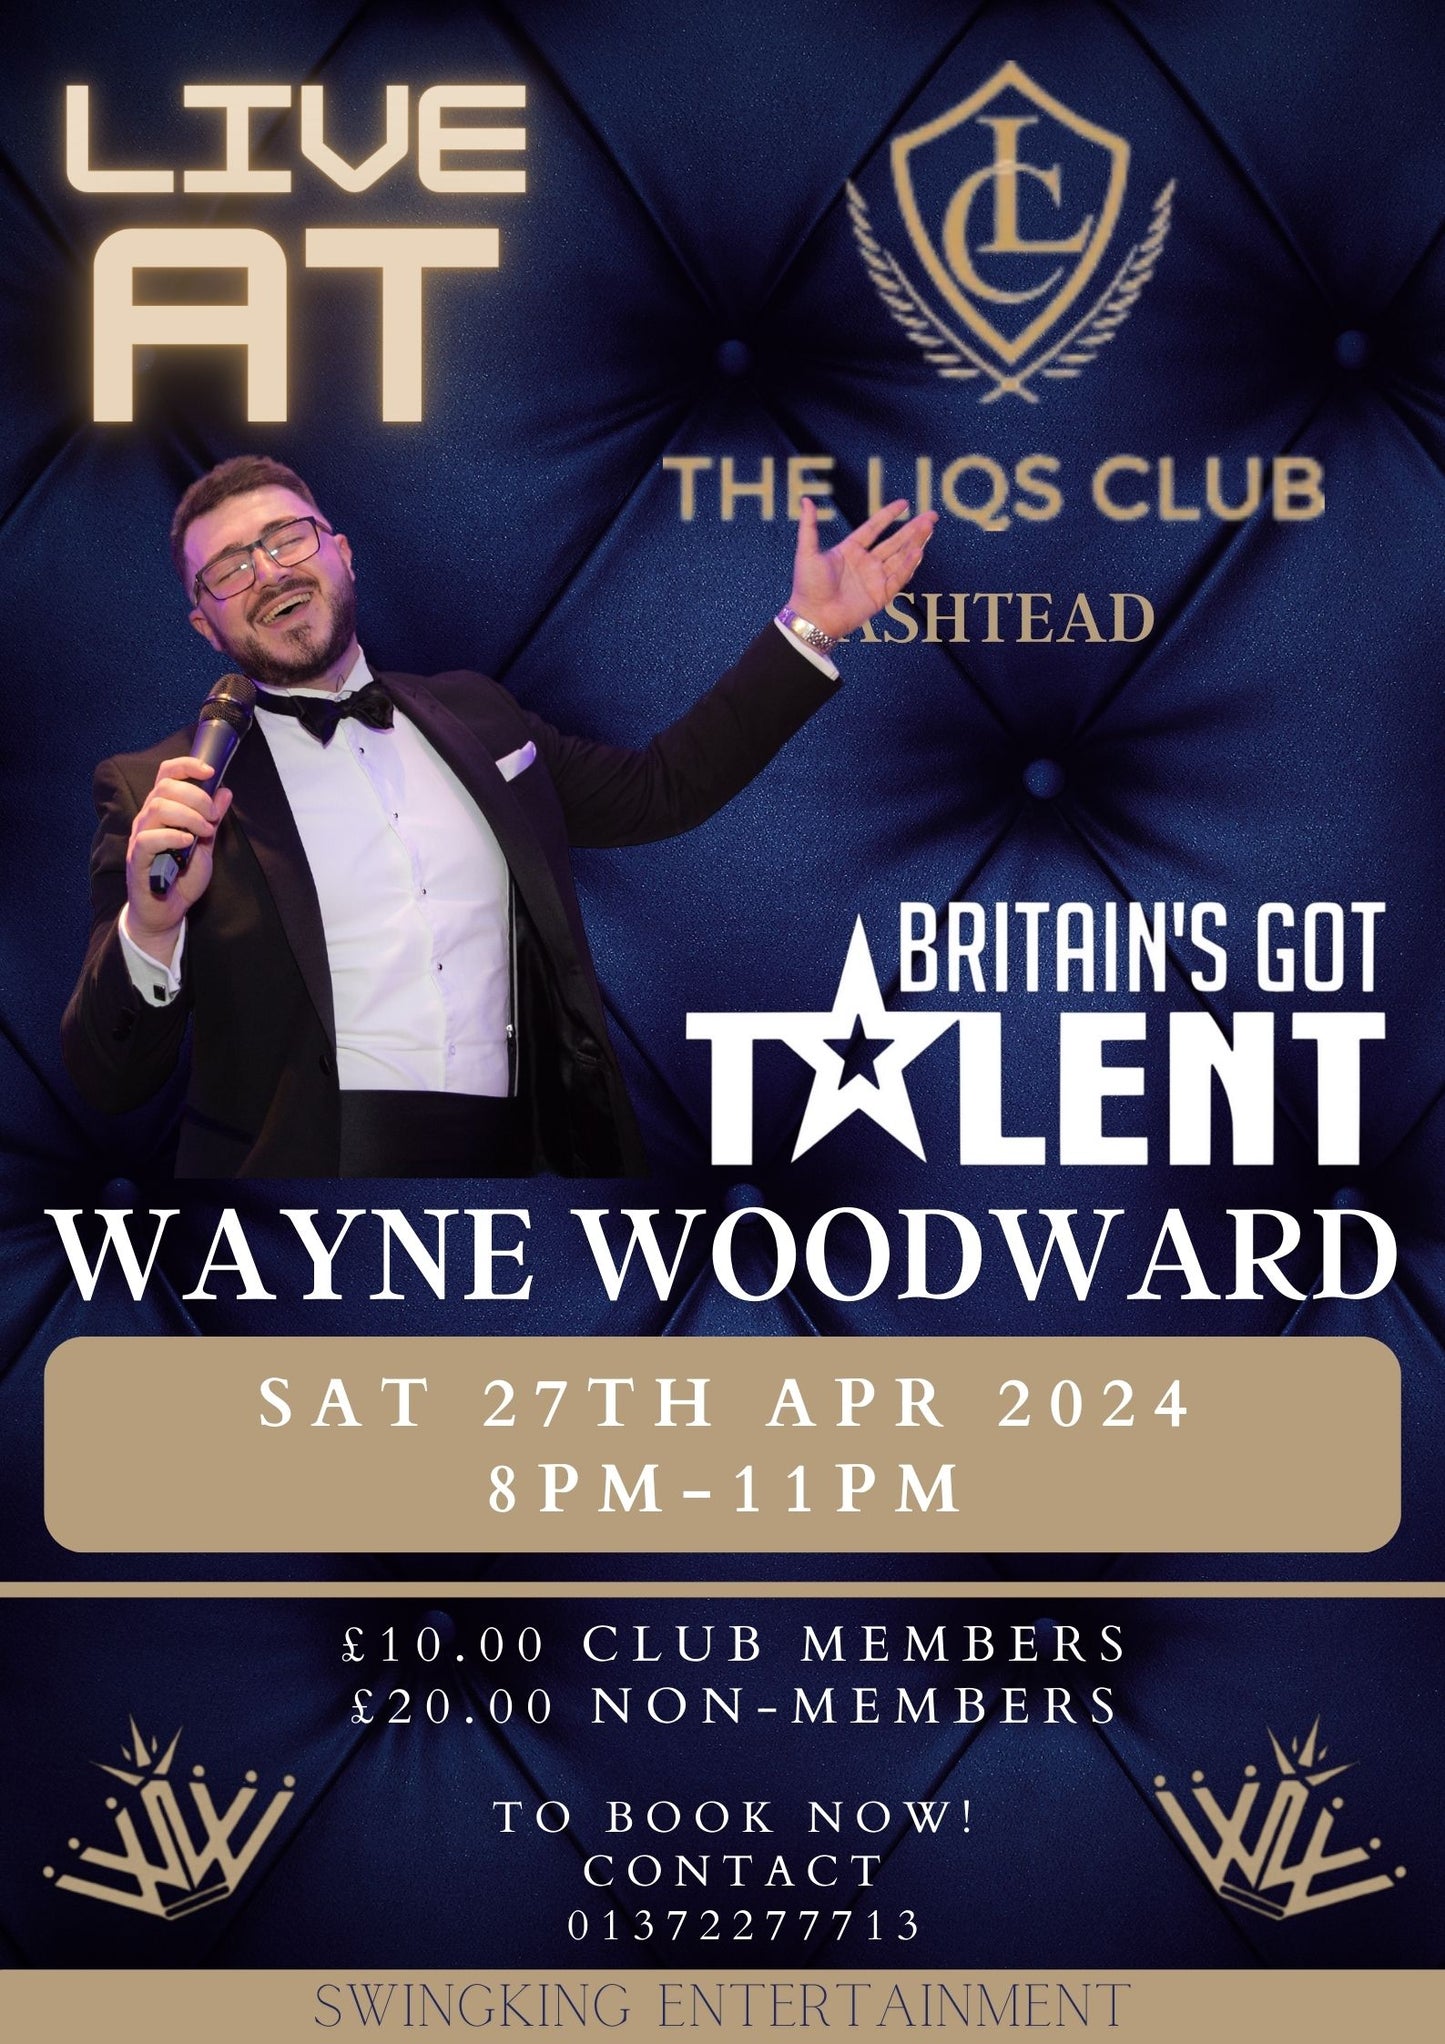 Live Music with Wayne Woodward - Saturday 27th April 2024